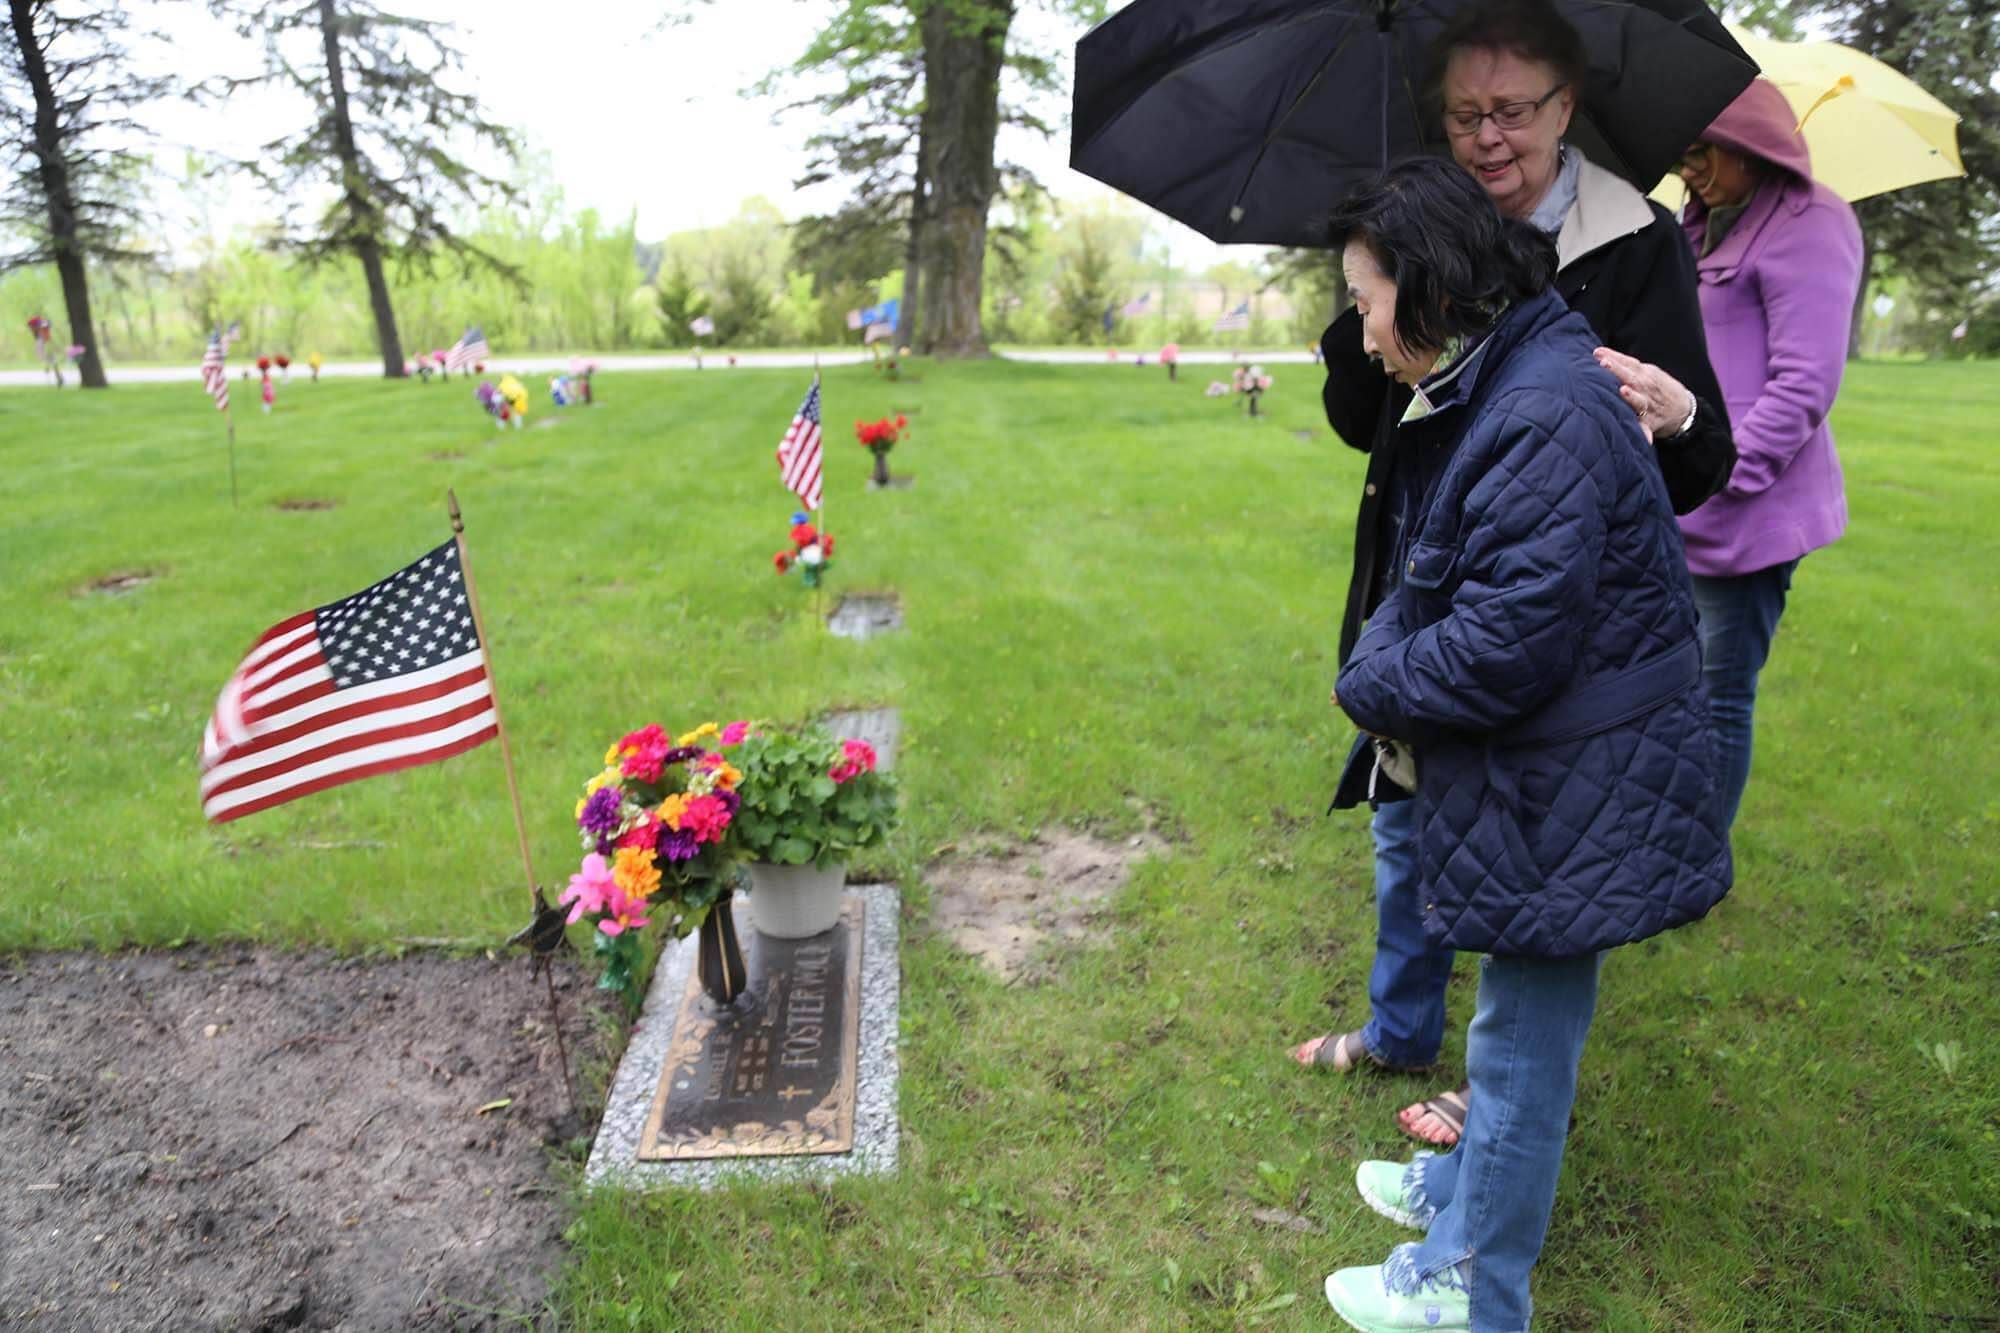 Sook-nyeon Kim pays her respects to her son's adoptive father, at his gravesite in Willmar, Minnesota.